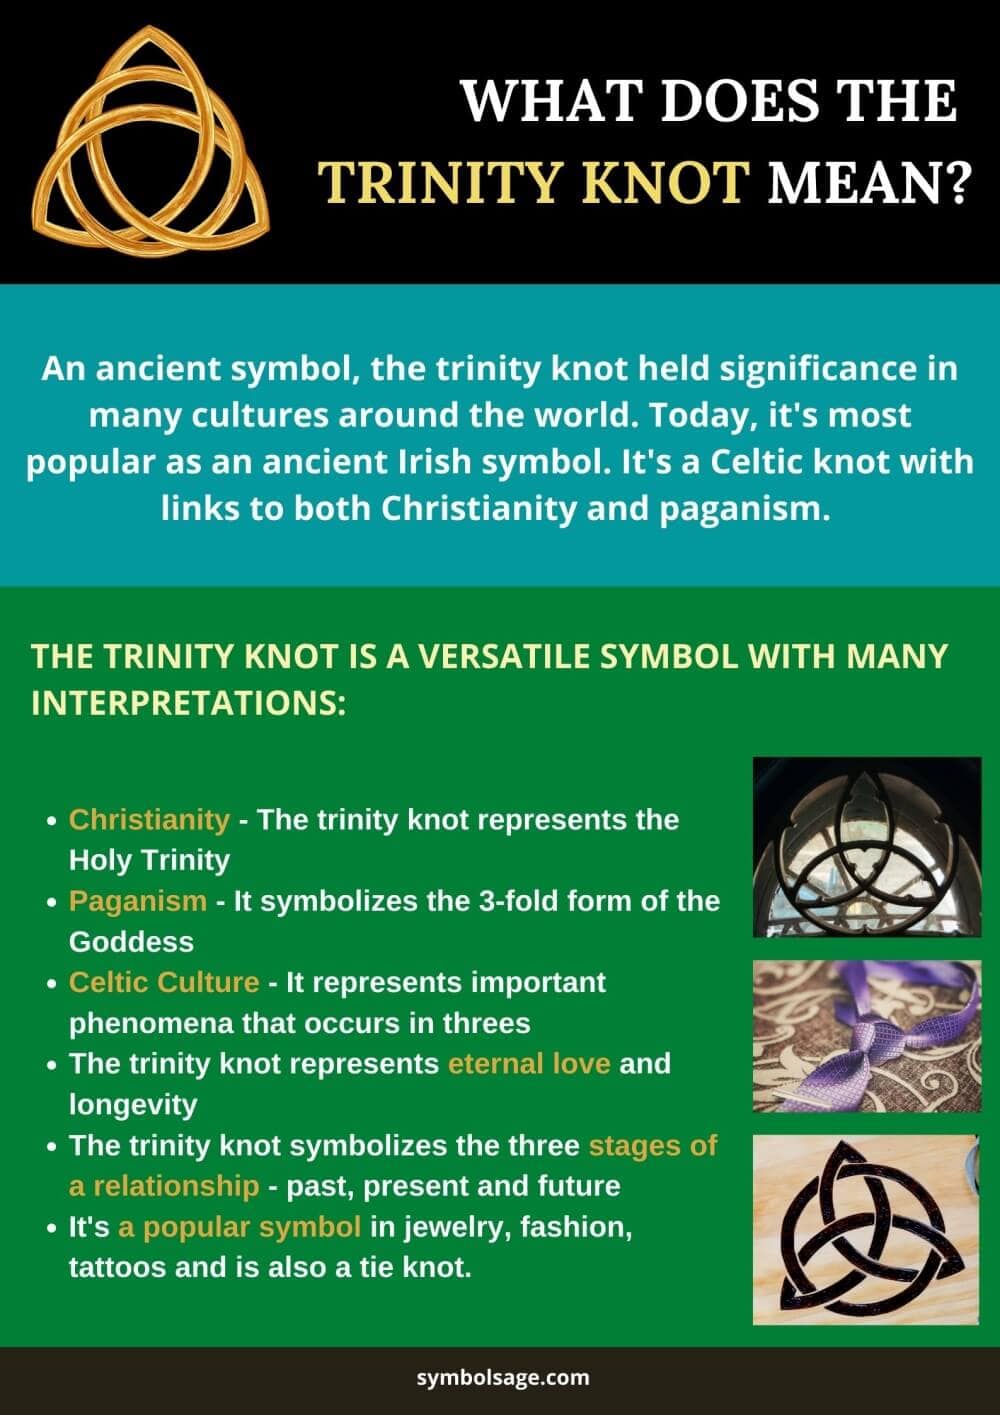 Trinity knot meaning infographic